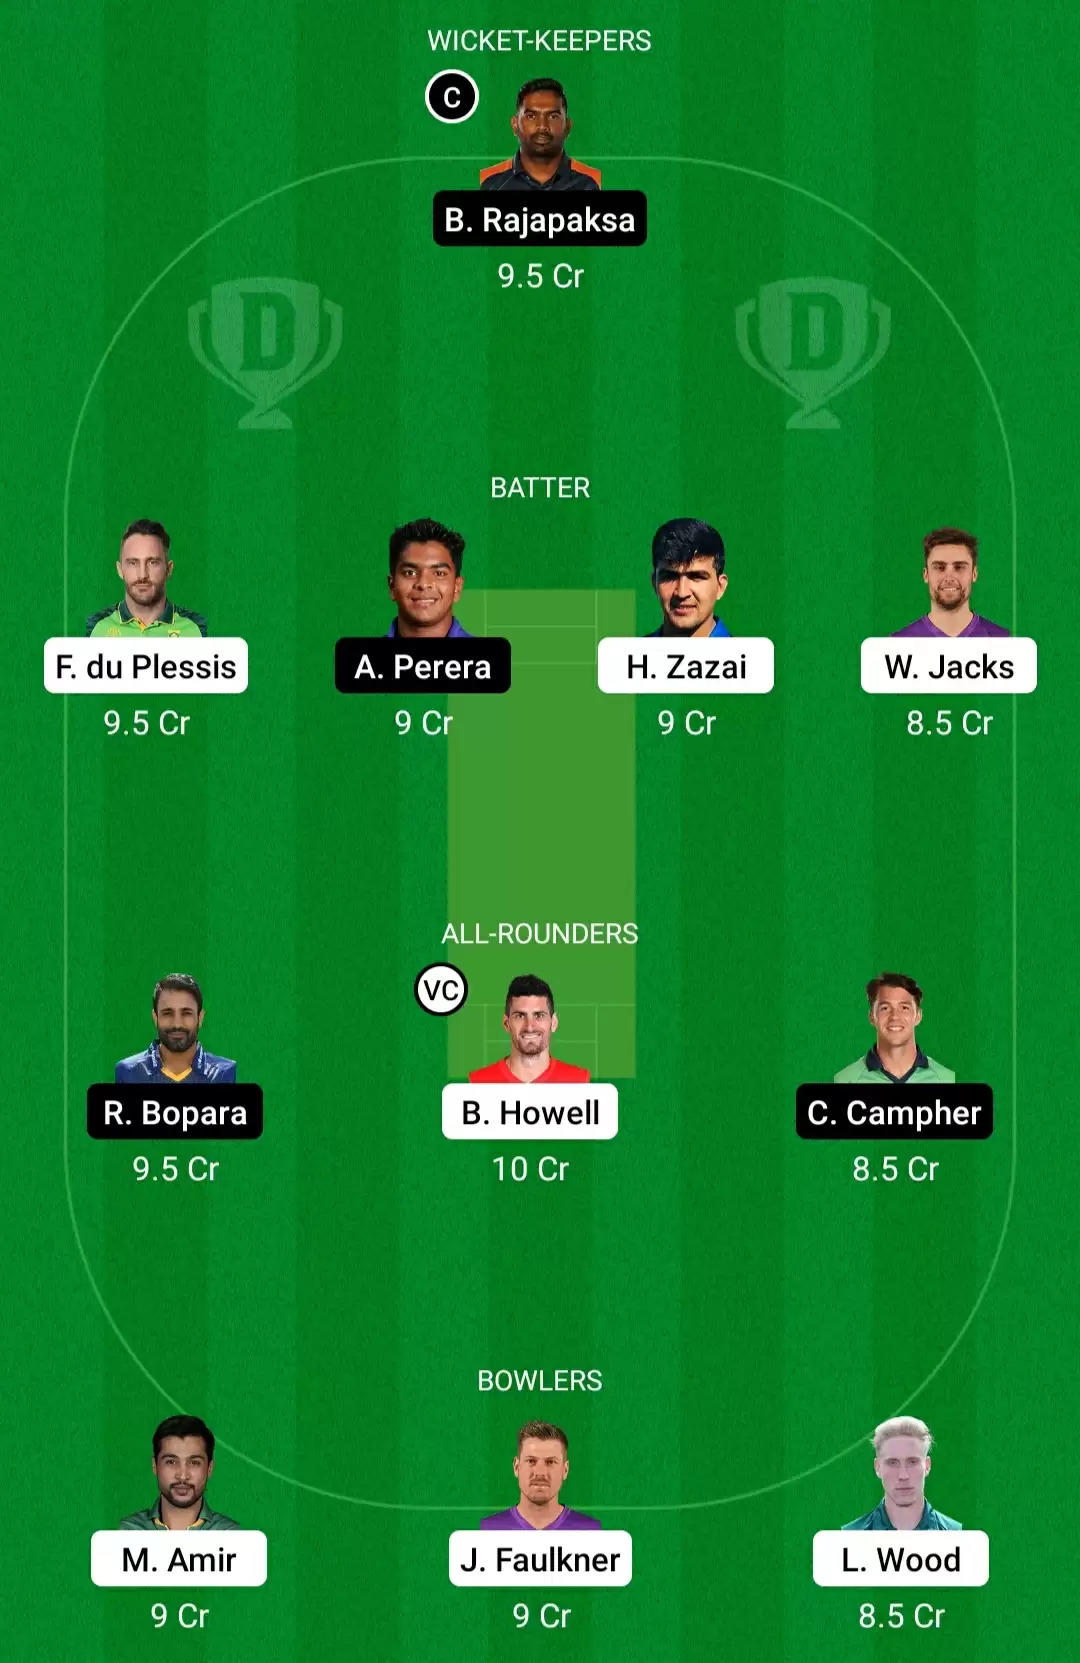 BT vs CB Dream11 Prediction for Abu Dhabi T10 League 2021: Playing XI, Fantasy Cricket Tips, Team, Weather Updates and Pitch Report